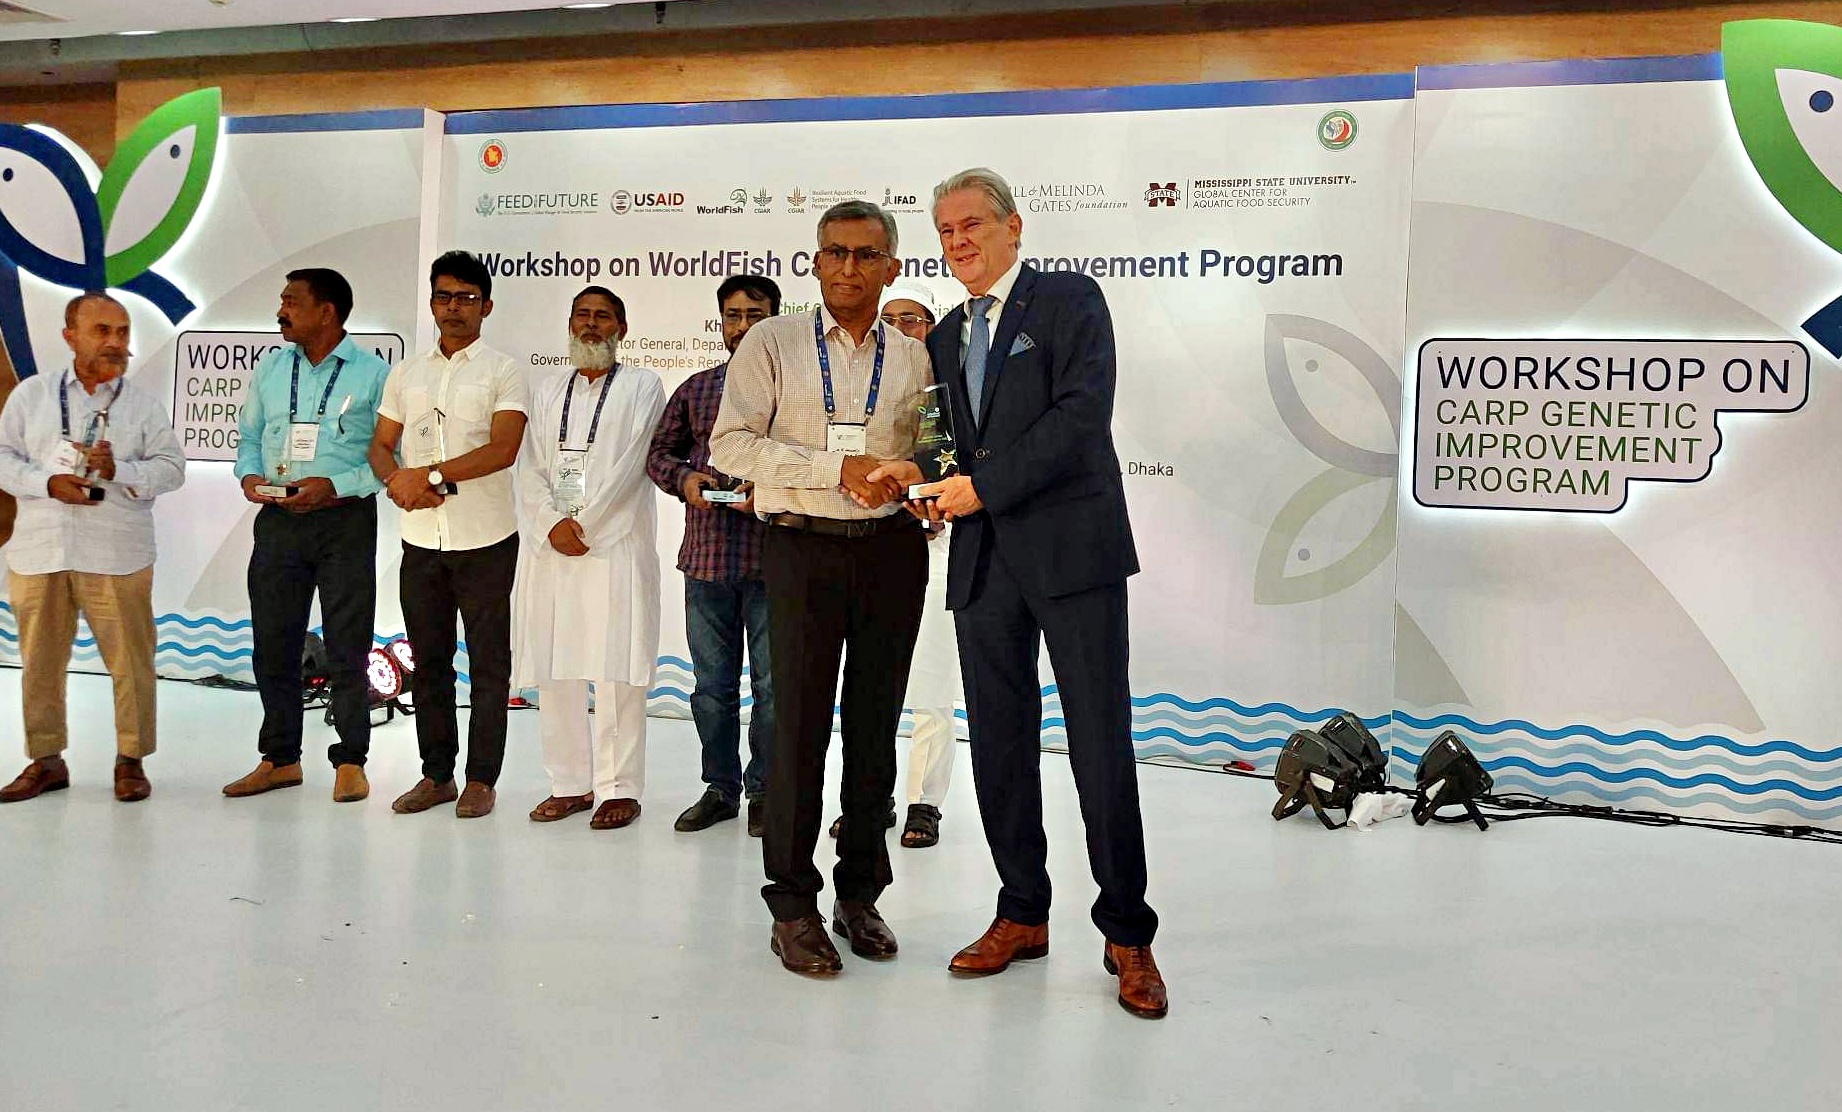 M. Gulam Hussain received an appreciation crest on behalf of the Fish Innovation Lab from Christopher Price. (Provided by M. Gulam Hussain)